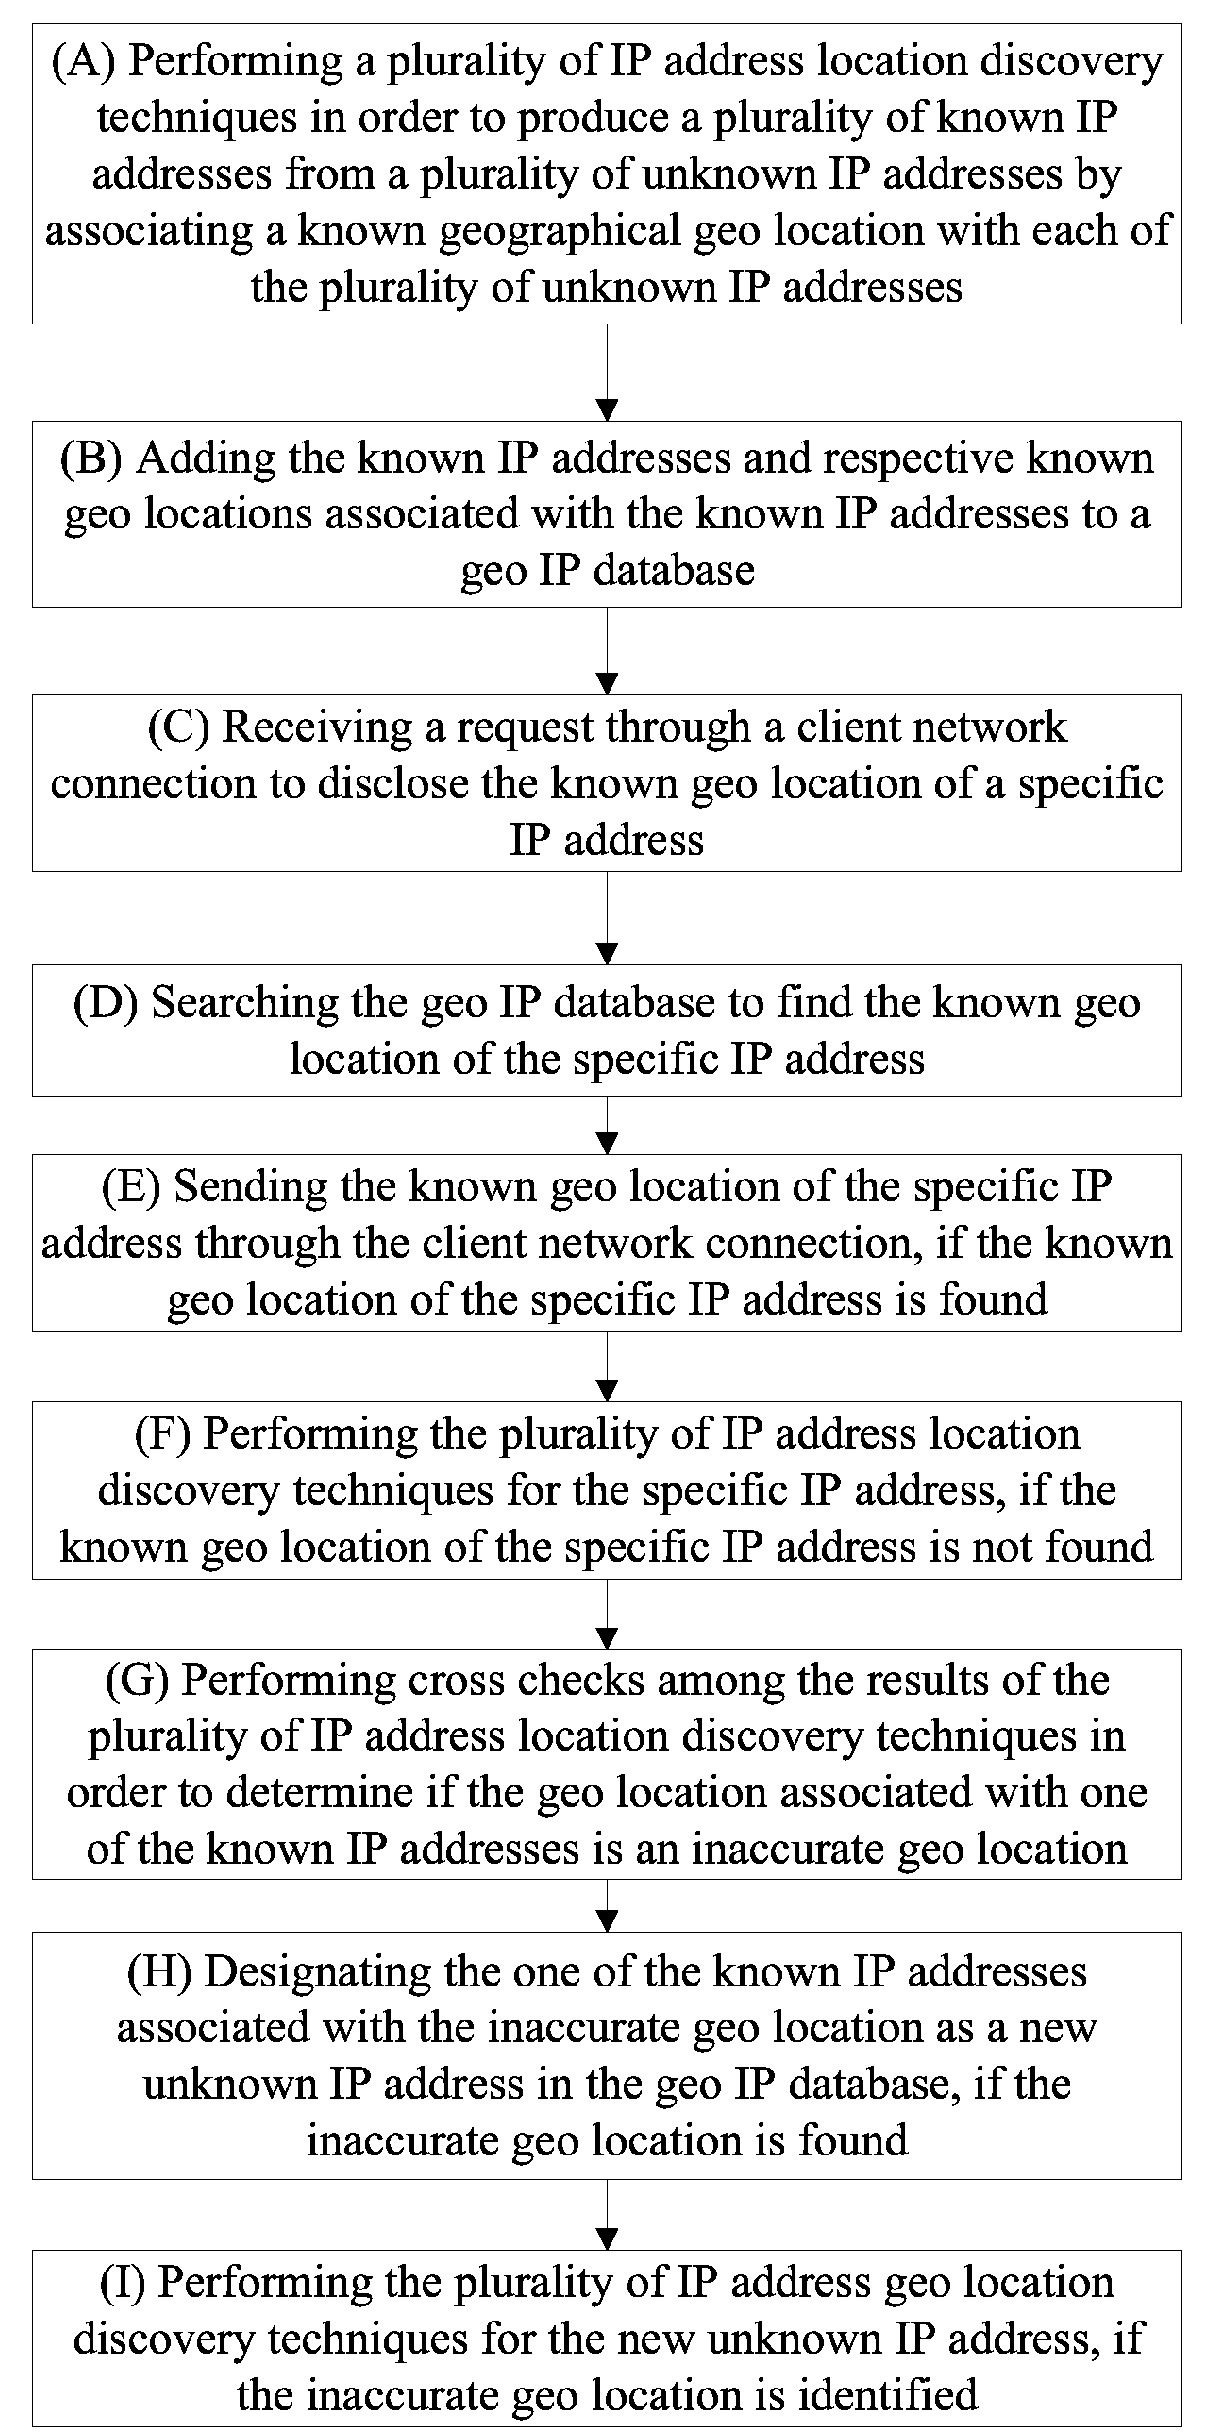 Method Of Near Real-Time Automated Global Geographical IP Address Discovery and Lookup by Executing Computer-Executable Instructions Stored On a Non-Transitory Computer-Readable Medium